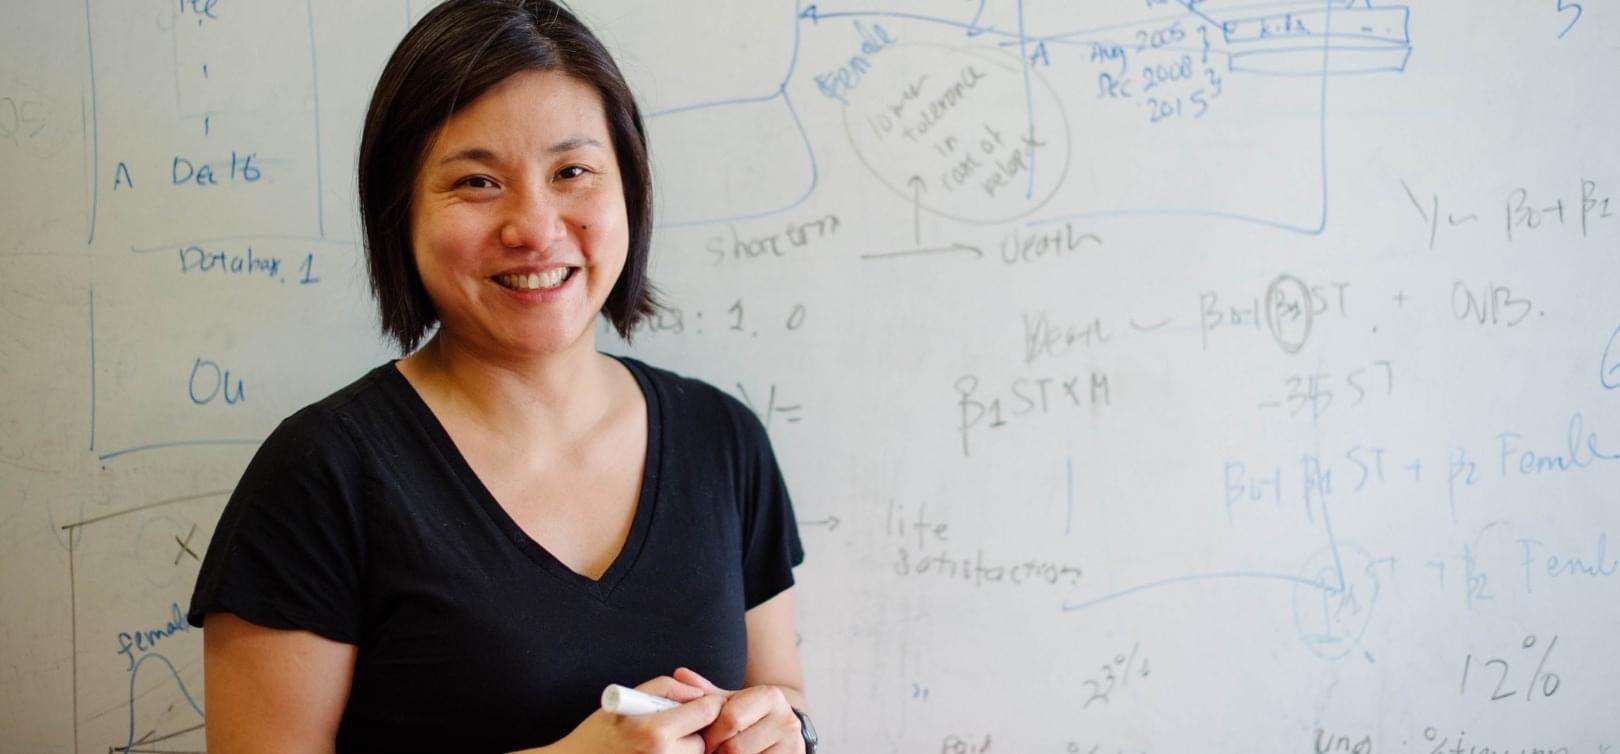 "Professor Sera Linardi holds a marker in front of a whiteboard full of graphs and equations"